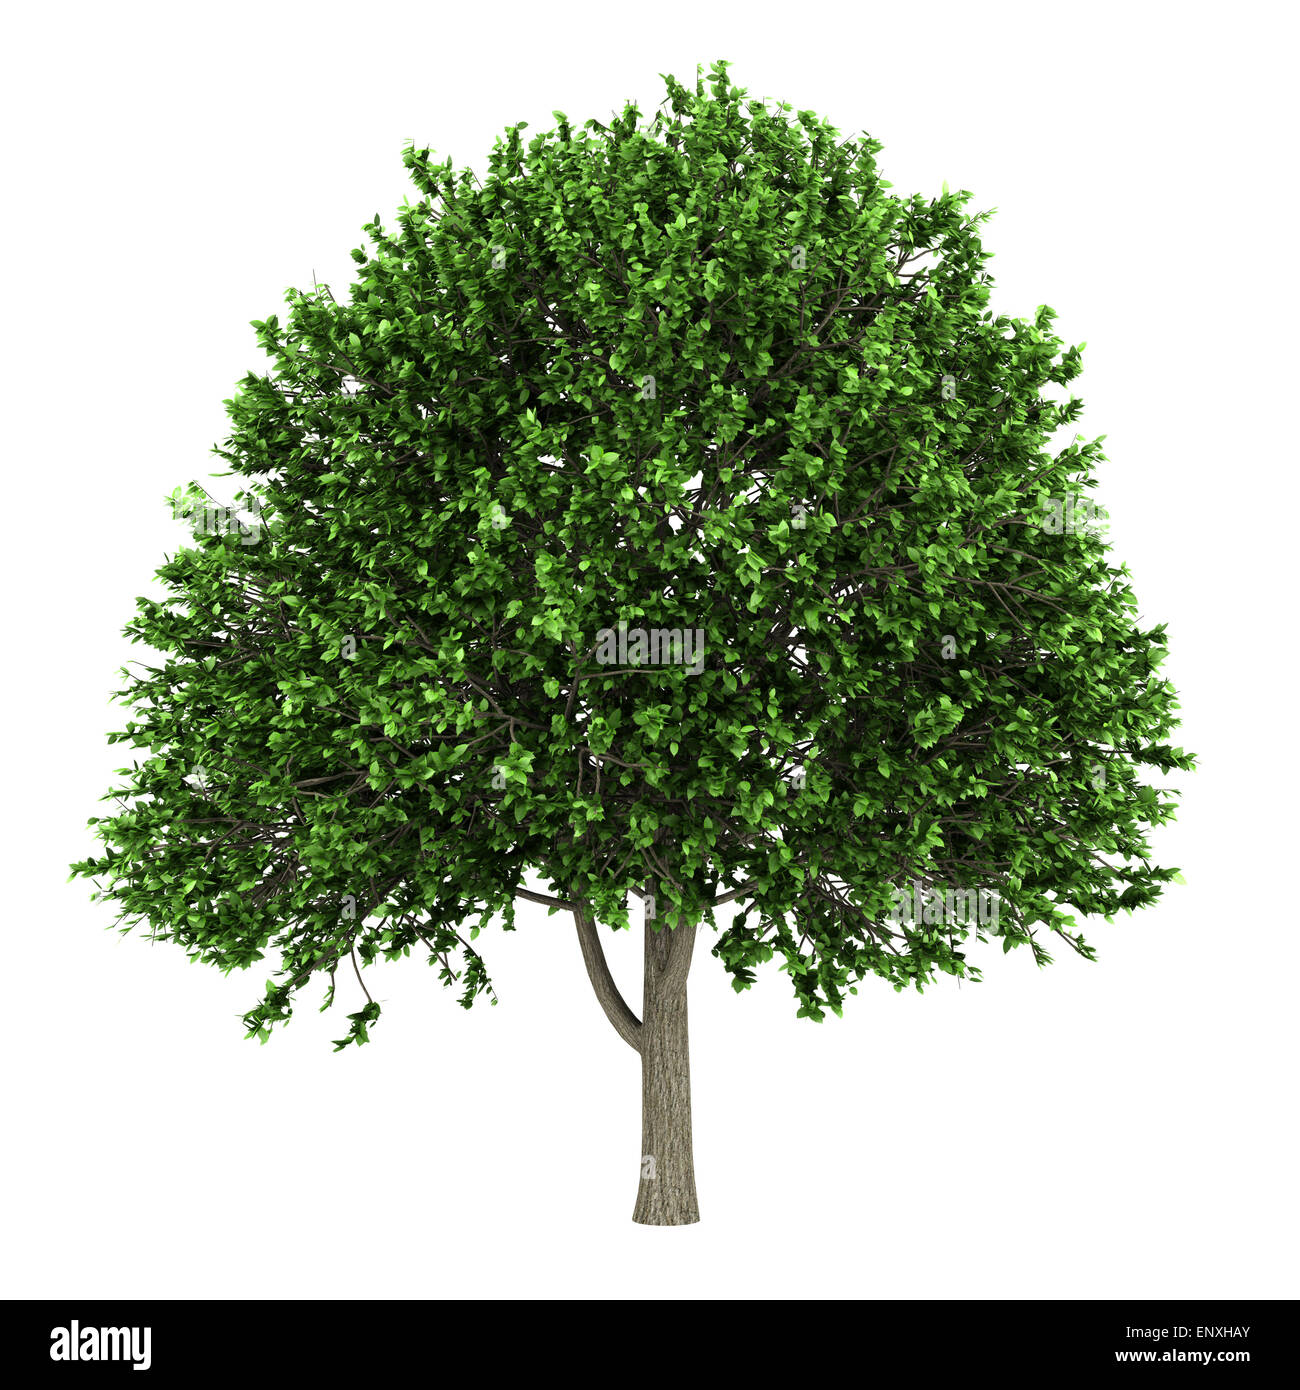 american elm tree isolated on white background Stock Photo